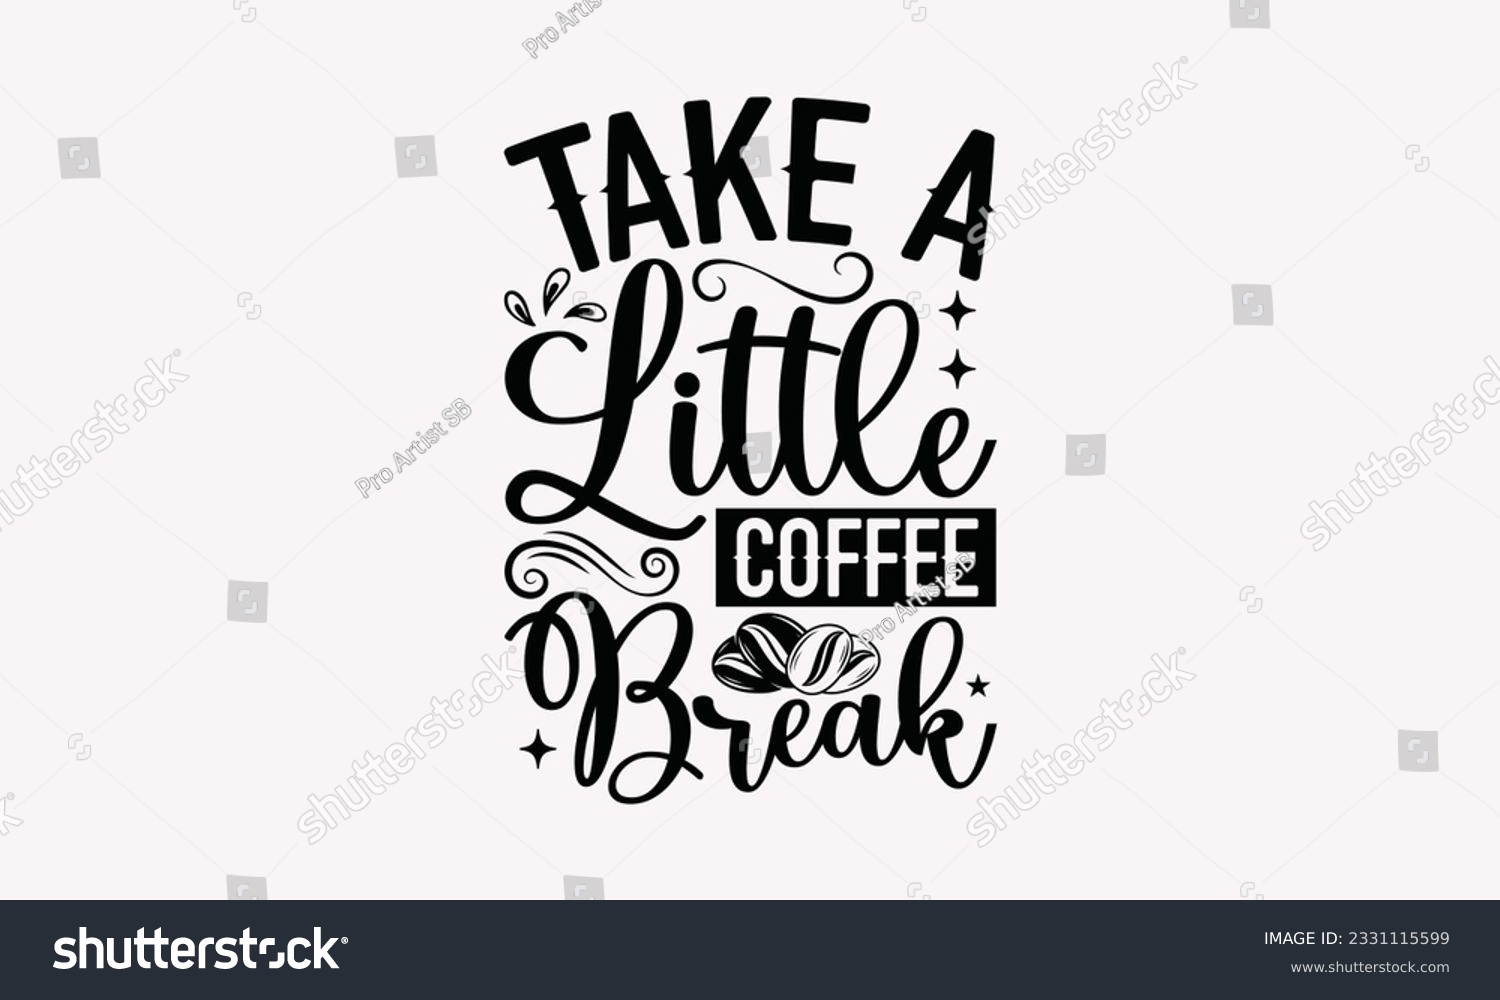 SVG of Take a little coffee break - Coffee SVG Design Template, Drink Quotes, Calligraphy graphic design, Typography poster with old style camera and quote. svg